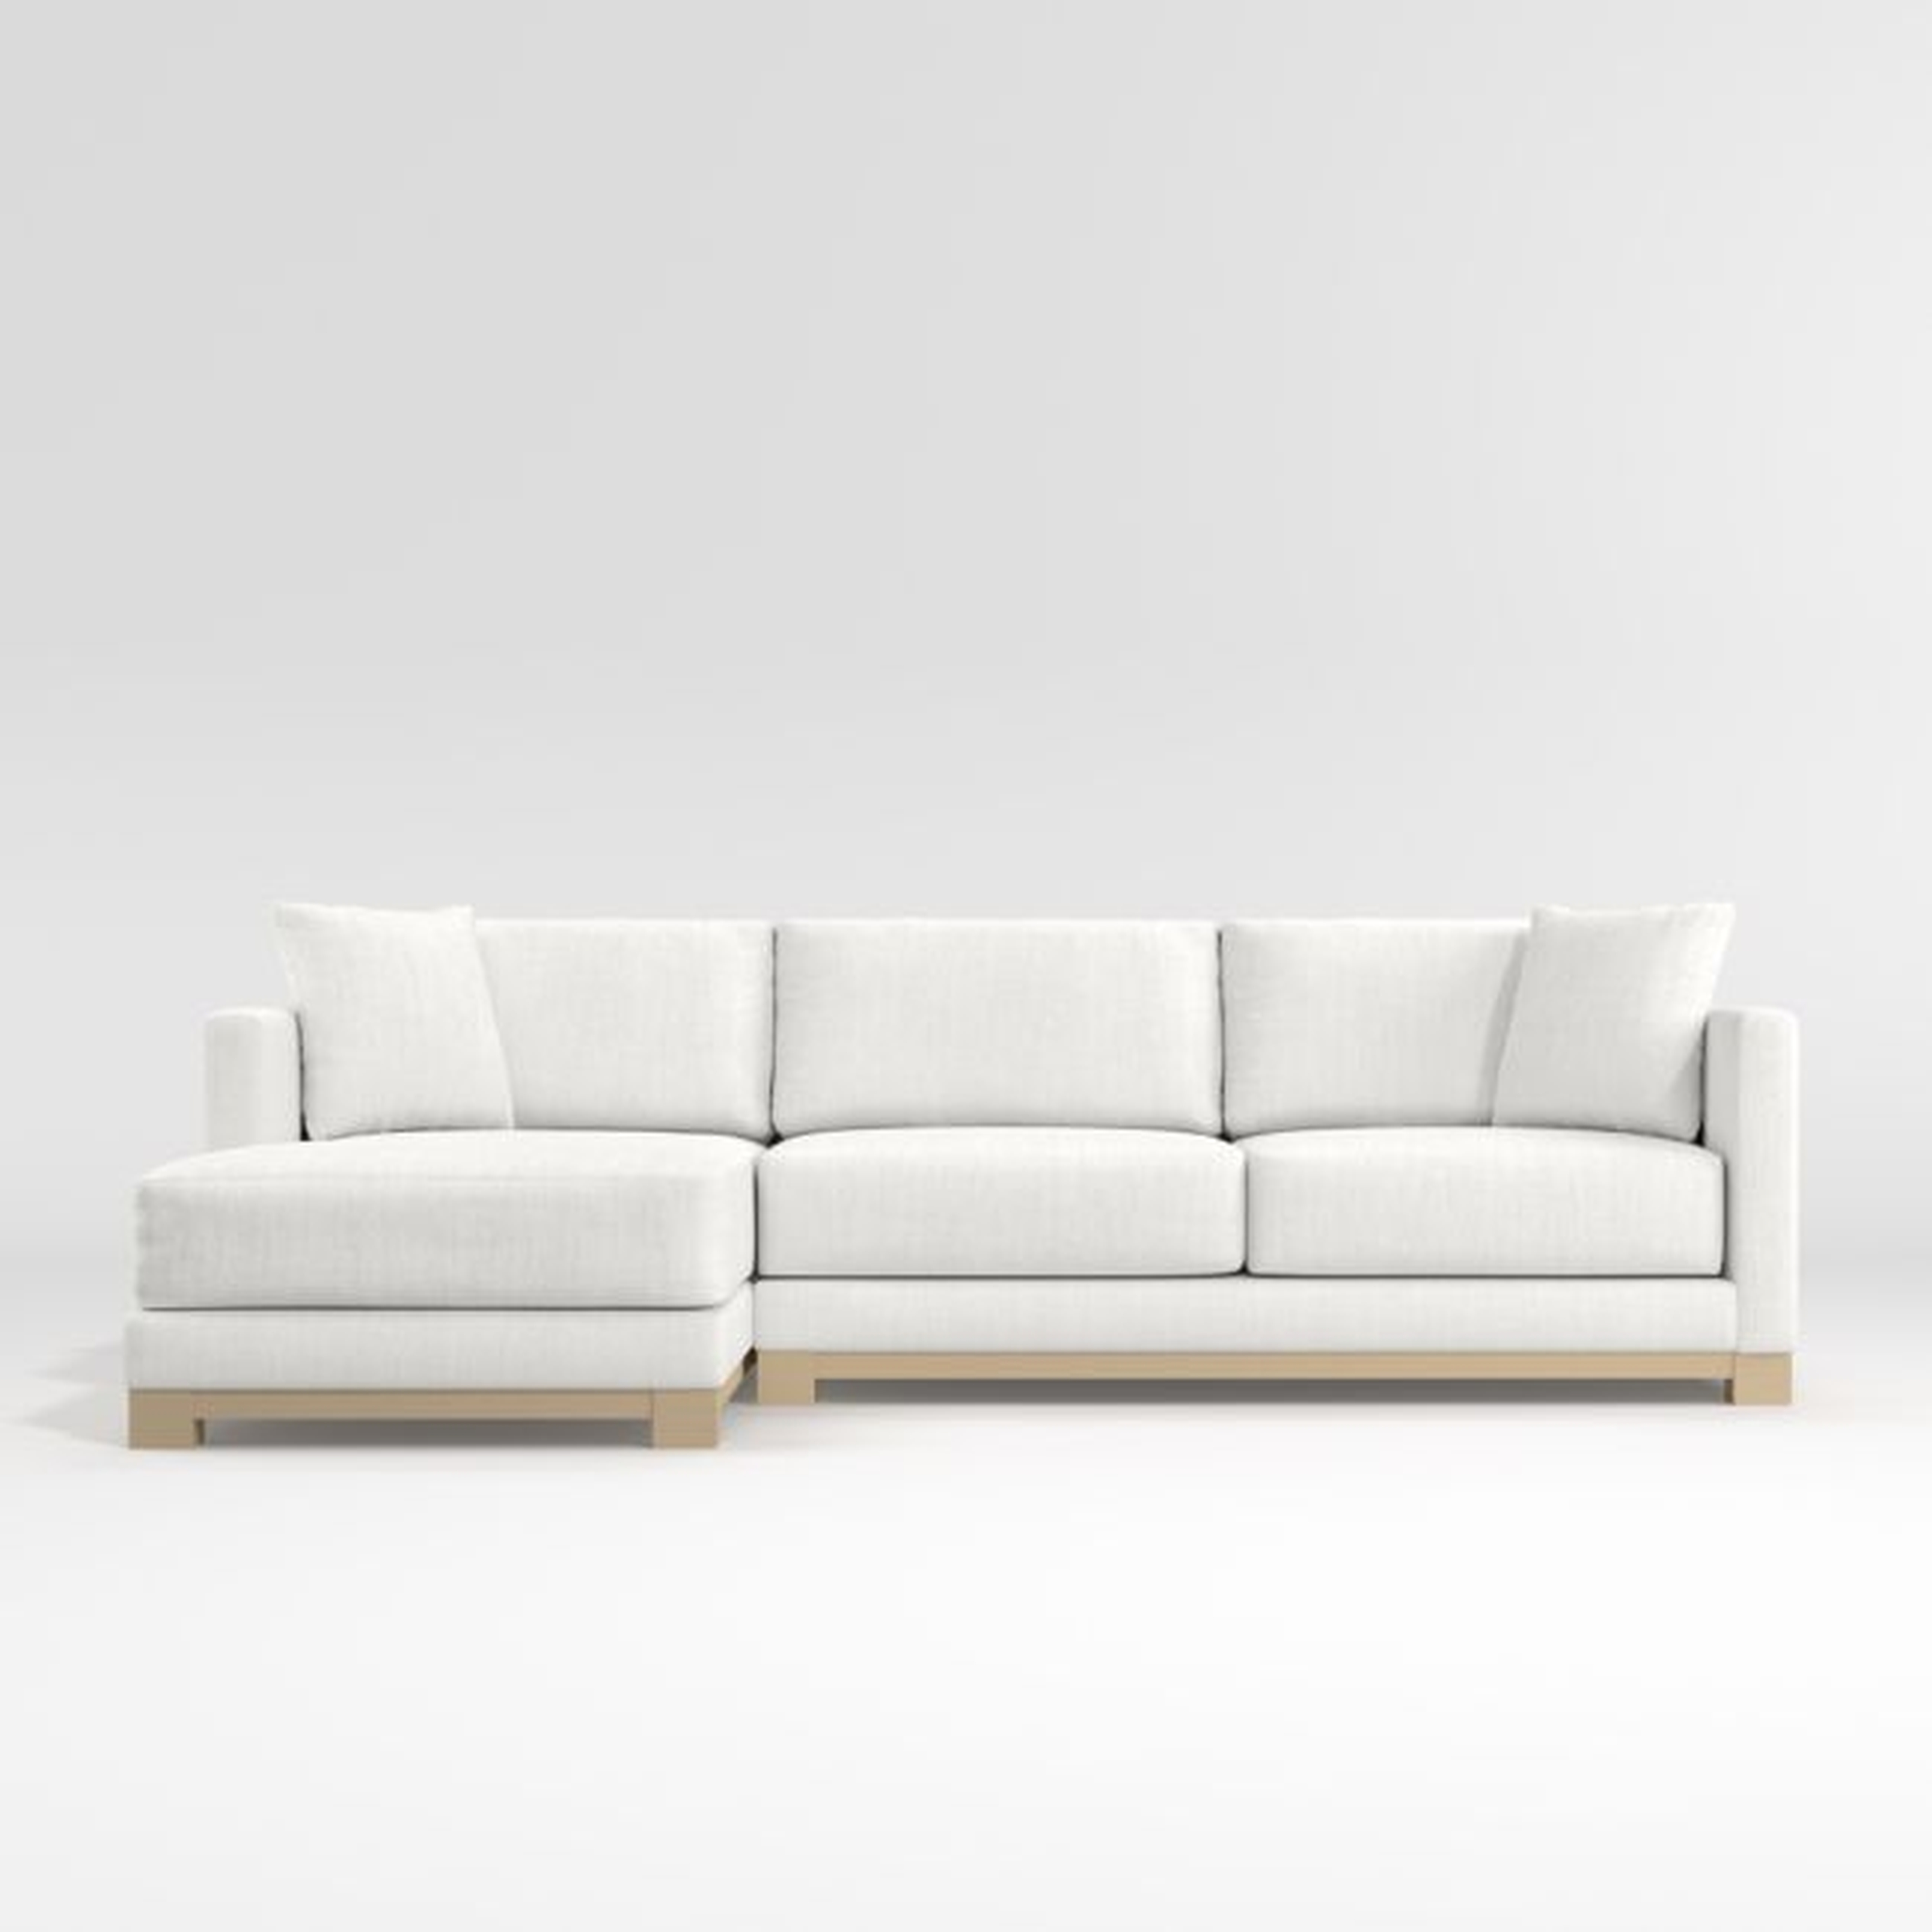 Gather Wood Base 2-Piece Sectional Sofa - Crate and Barrel